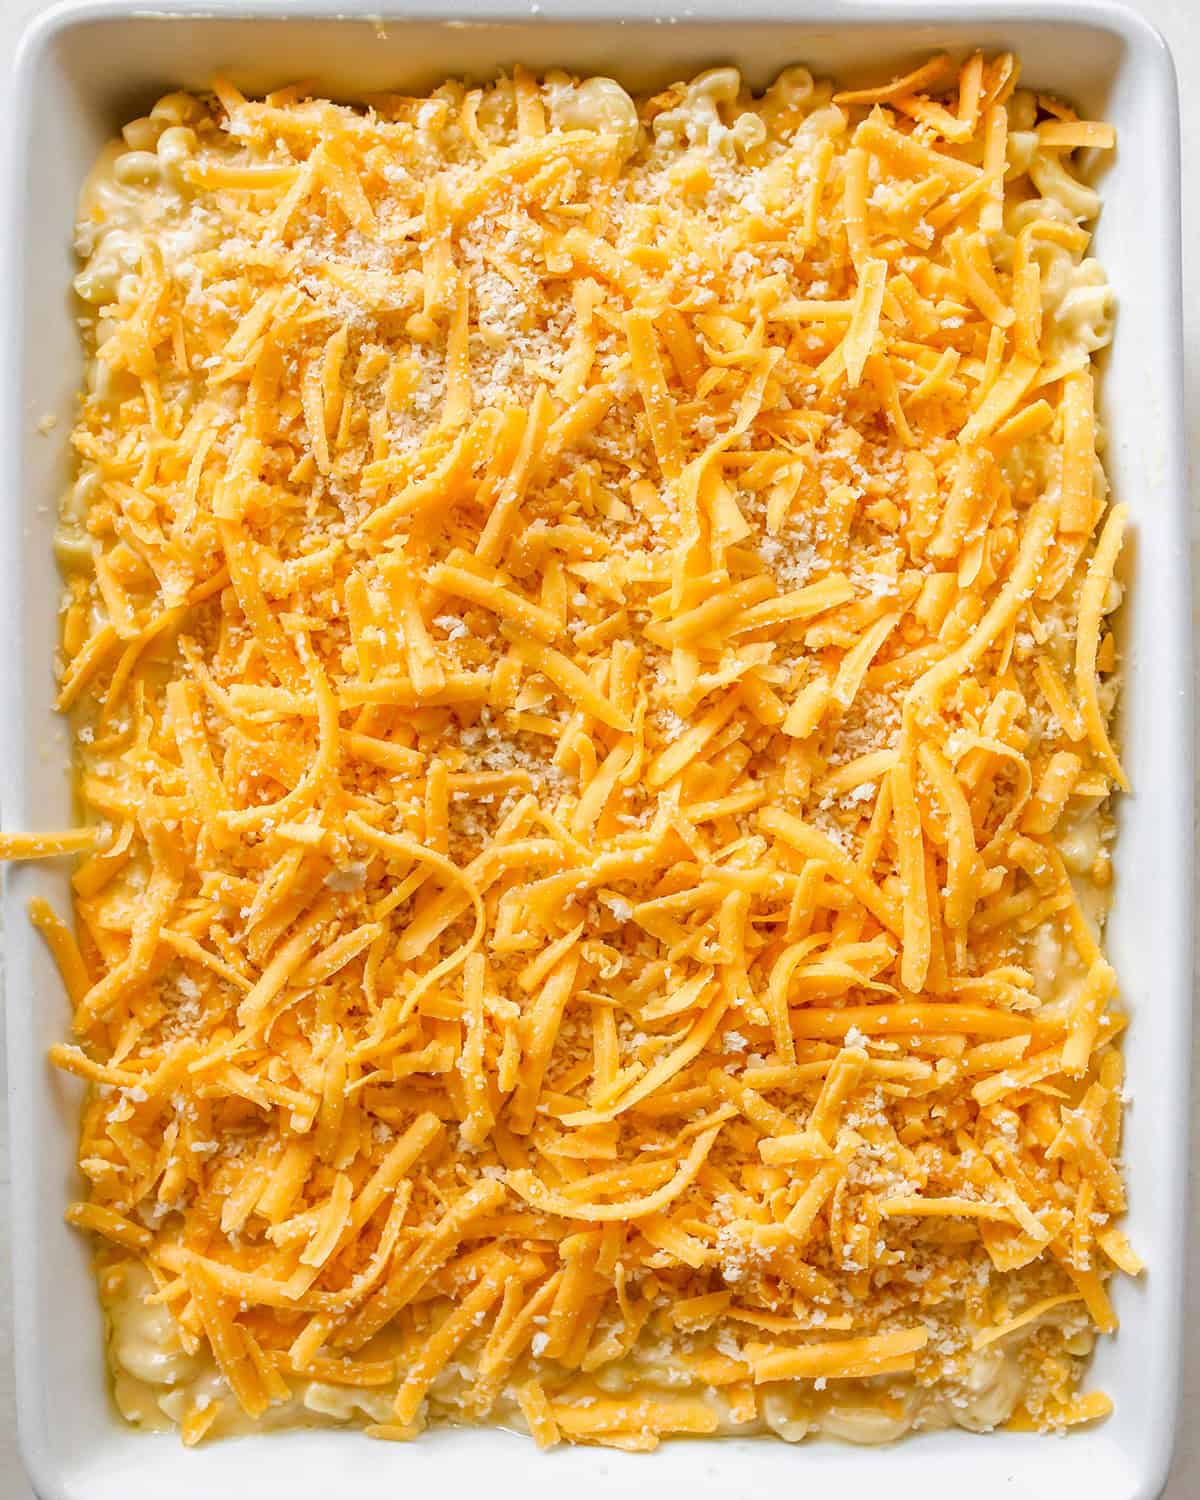 Greek Yogurt Mac & Cheese in a baking dish with the topping before baking